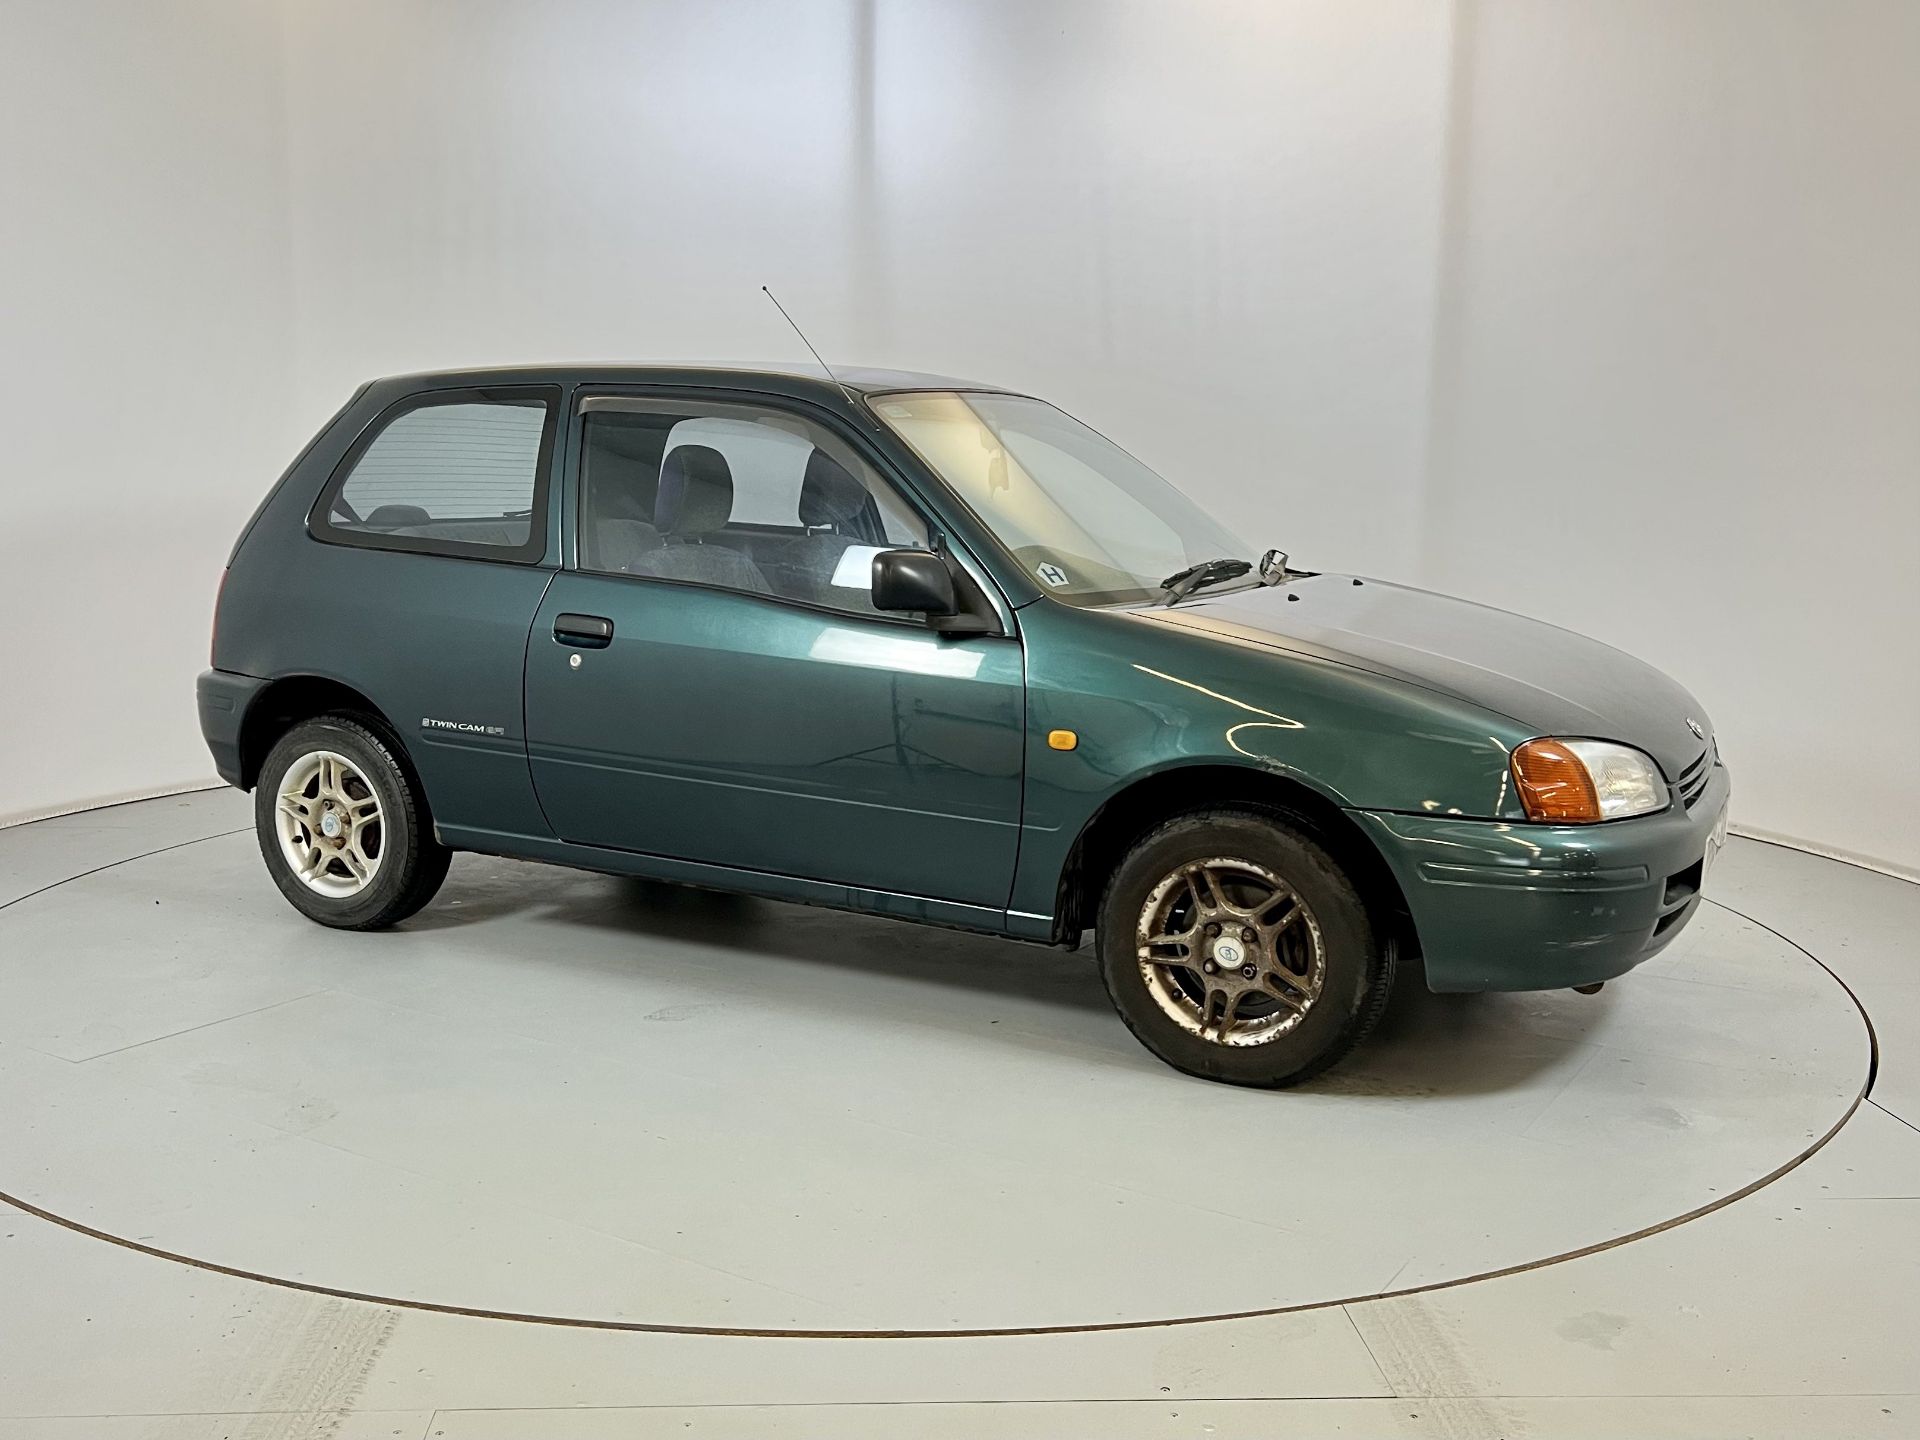 Toyota Starlet - Image 12 of 27